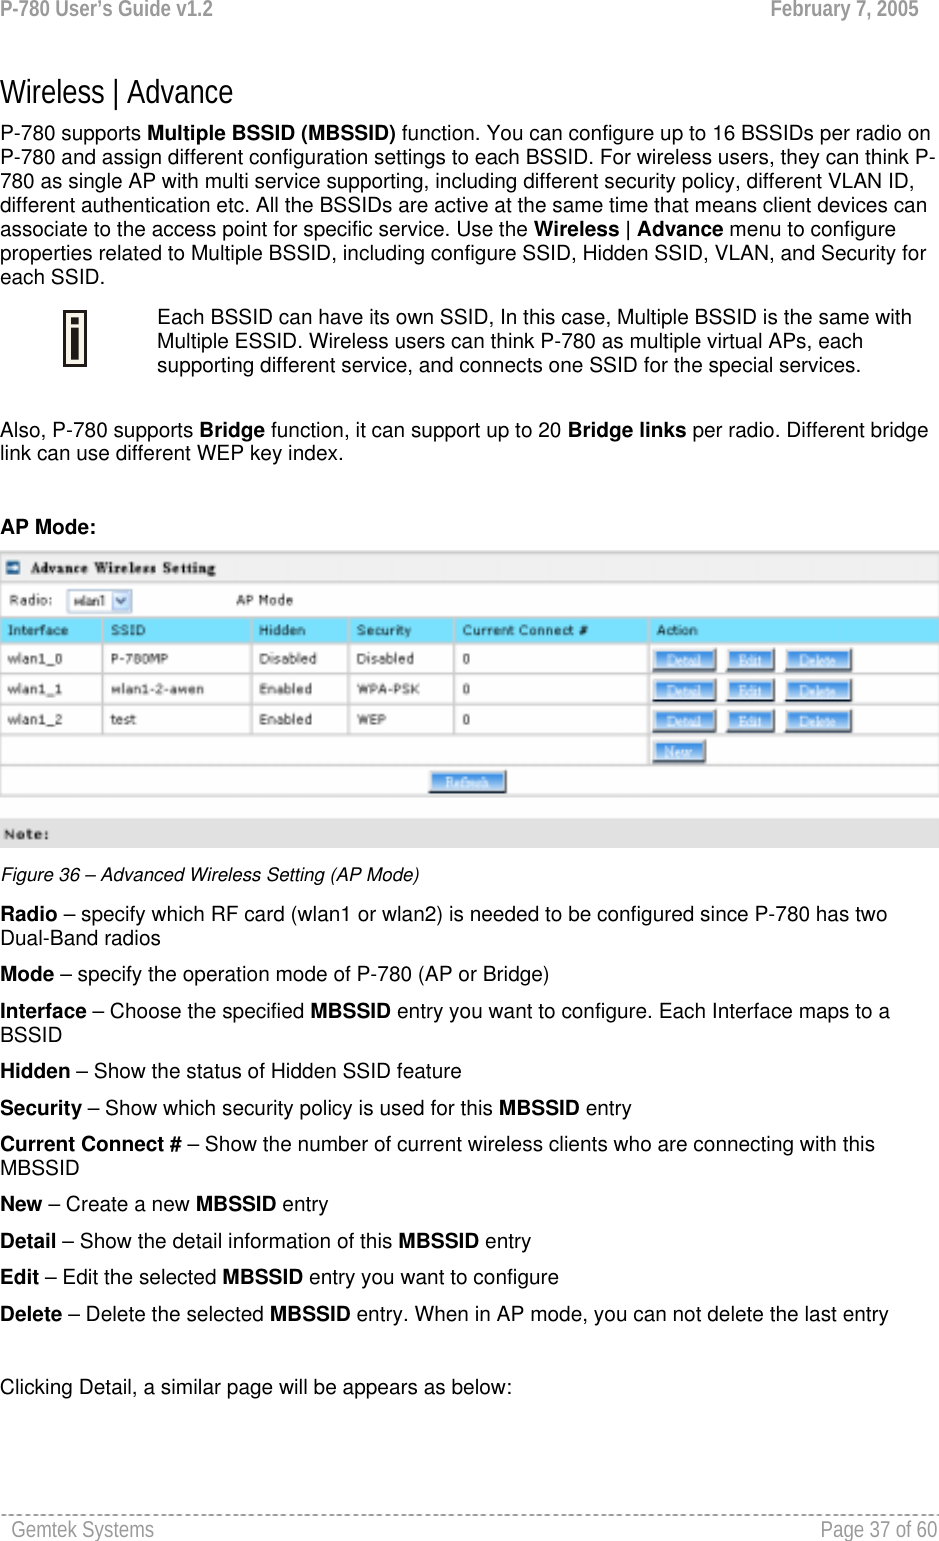 P-780 User’s Guide v1.2  February 7, 2005 Gemtek Systems    Page 37 of 60   Wireless | Advance  P-780 supports Multiple BSSID (MBSSID) function. You can configure up to 16 BSSIDs per radio on P-780 and assign different configuration settings to each BSSID. For wireless users, they can think P-780 as single AP with multi service supporting, including different security policy, different VLAN ID, different authentication etc. All the BSSIDs are active at the same time that means client devices can associate to the access point for specific service. Use the Wireless | Advance menu to configure properties related to Multiple BSSID, including configure SSID, Hidden SSID, VLAN, and Security for each SSID.  Each BSSID can have its own SSID, In this case, Multiple BSSID is the same with Multiple ESSID. Wireless users can think P-780 as multiple virtual APs, each supporting different service, and connects one SSID for the special services.   Also, P-780 supports Bridge function, it can support up to 20 Bridge links per radio. Different bridge link can use different WEP key index.   AP Mode:  Figure 36 – Advanced Wireless Setting (AP Mode) Radio – specify which RF card (wlan1 or wlan2) is needed to be configured since P-780 has two Dual-Band radios Mode – specify the operation mode of P-780 (AP or Bridge) Interface – Choose the specified MBSSID entry you want to configure. Each Interface maps to a BSSID Hidden – Show the status of Hidden SSID feature Security – Show which security policy is used for this MBSSID entry Current Connect # – Show the number of current wireless clients who are connecting with this MBSSID New – Create a new MBSSID entry Detail – Show the detail information of this MBSSID entry Edit – Edit the selected MBSSID entry you want to configure Delete – Delete the selected MBSSID entry. When in AP mode, you can not delete the last entry  Clicking Detail, a similar page will be appears as below: 